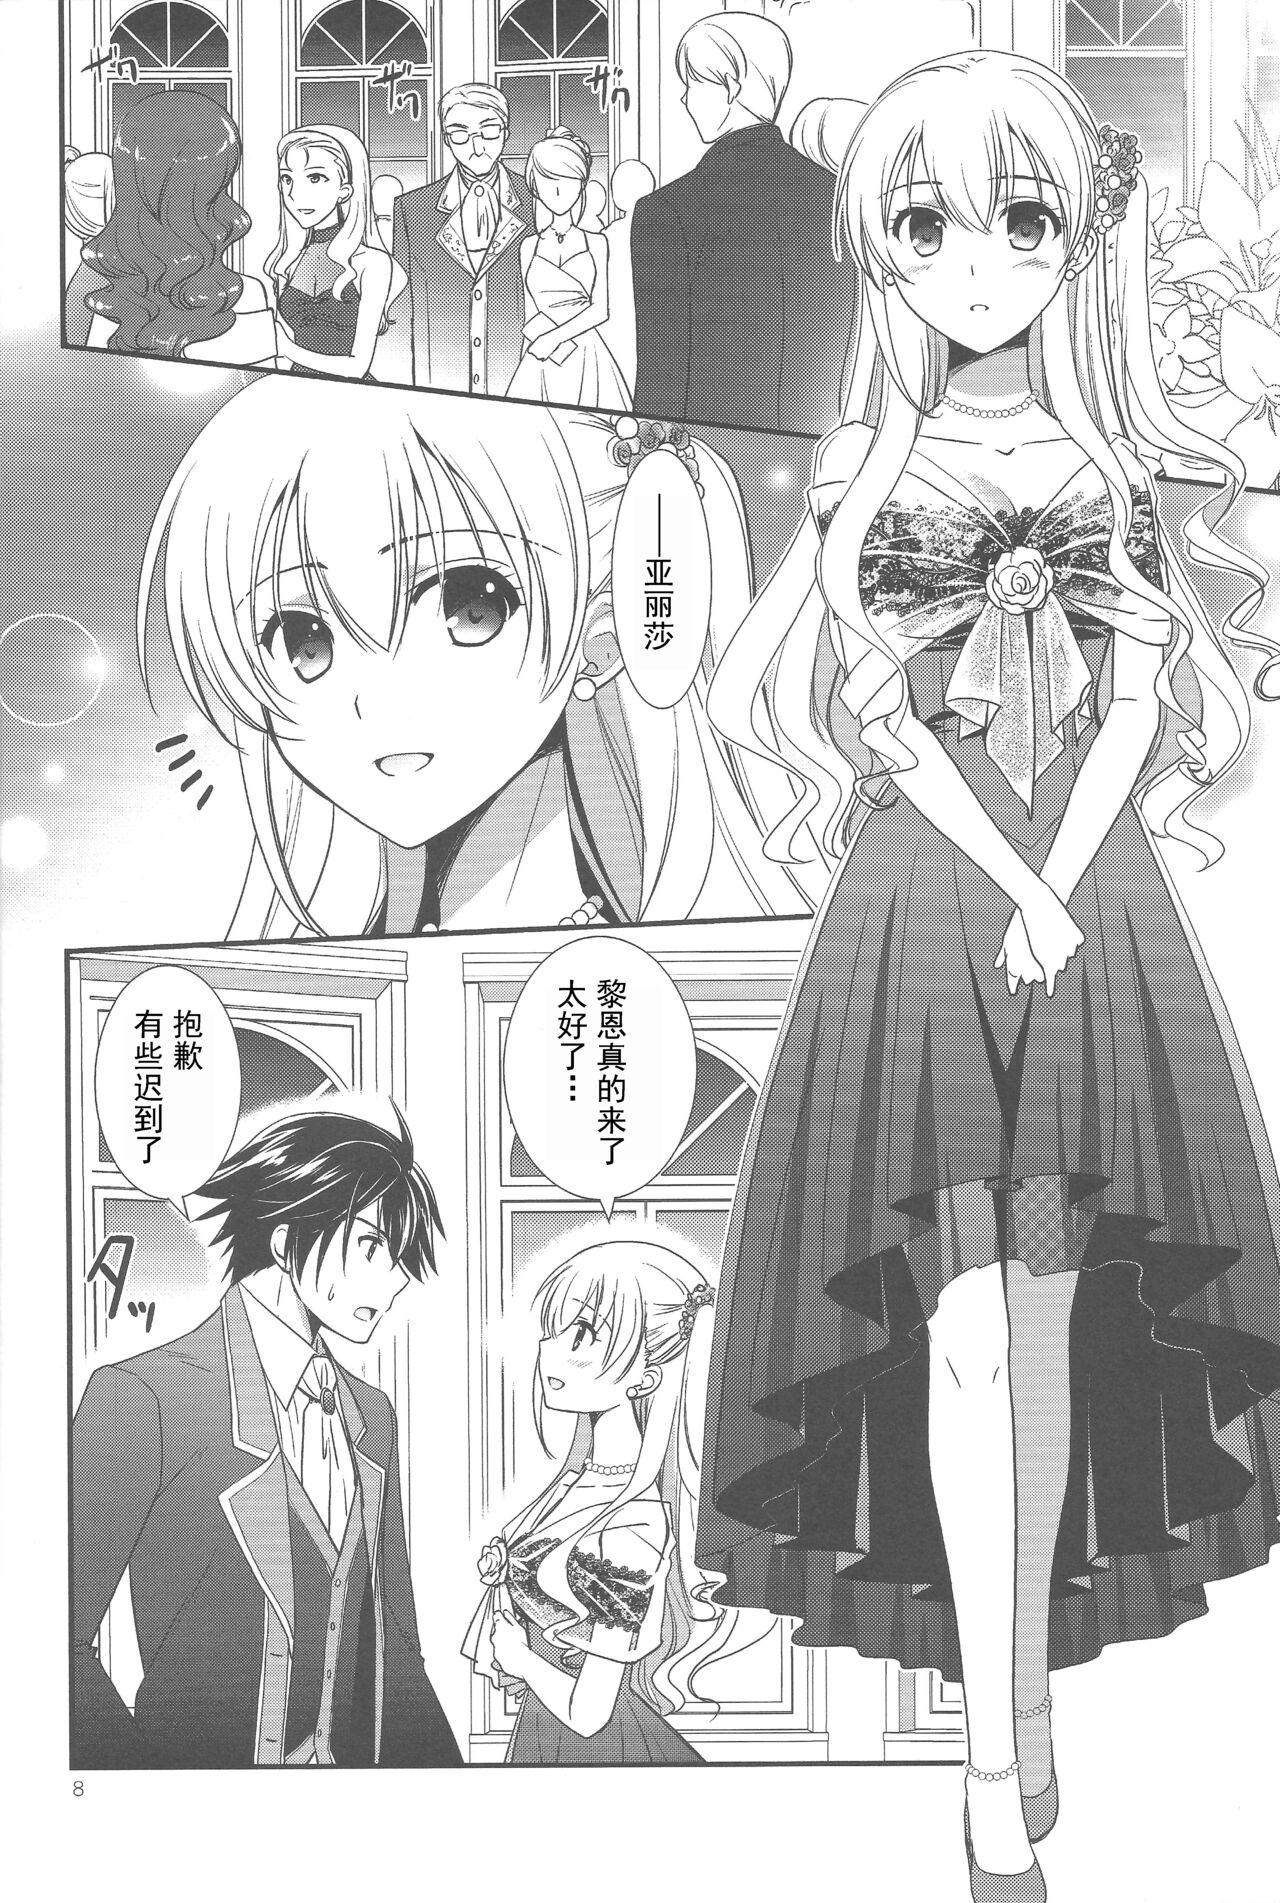 Indonesia Party night - The legend of heroes | eiyuu densetsu Time - Page 7